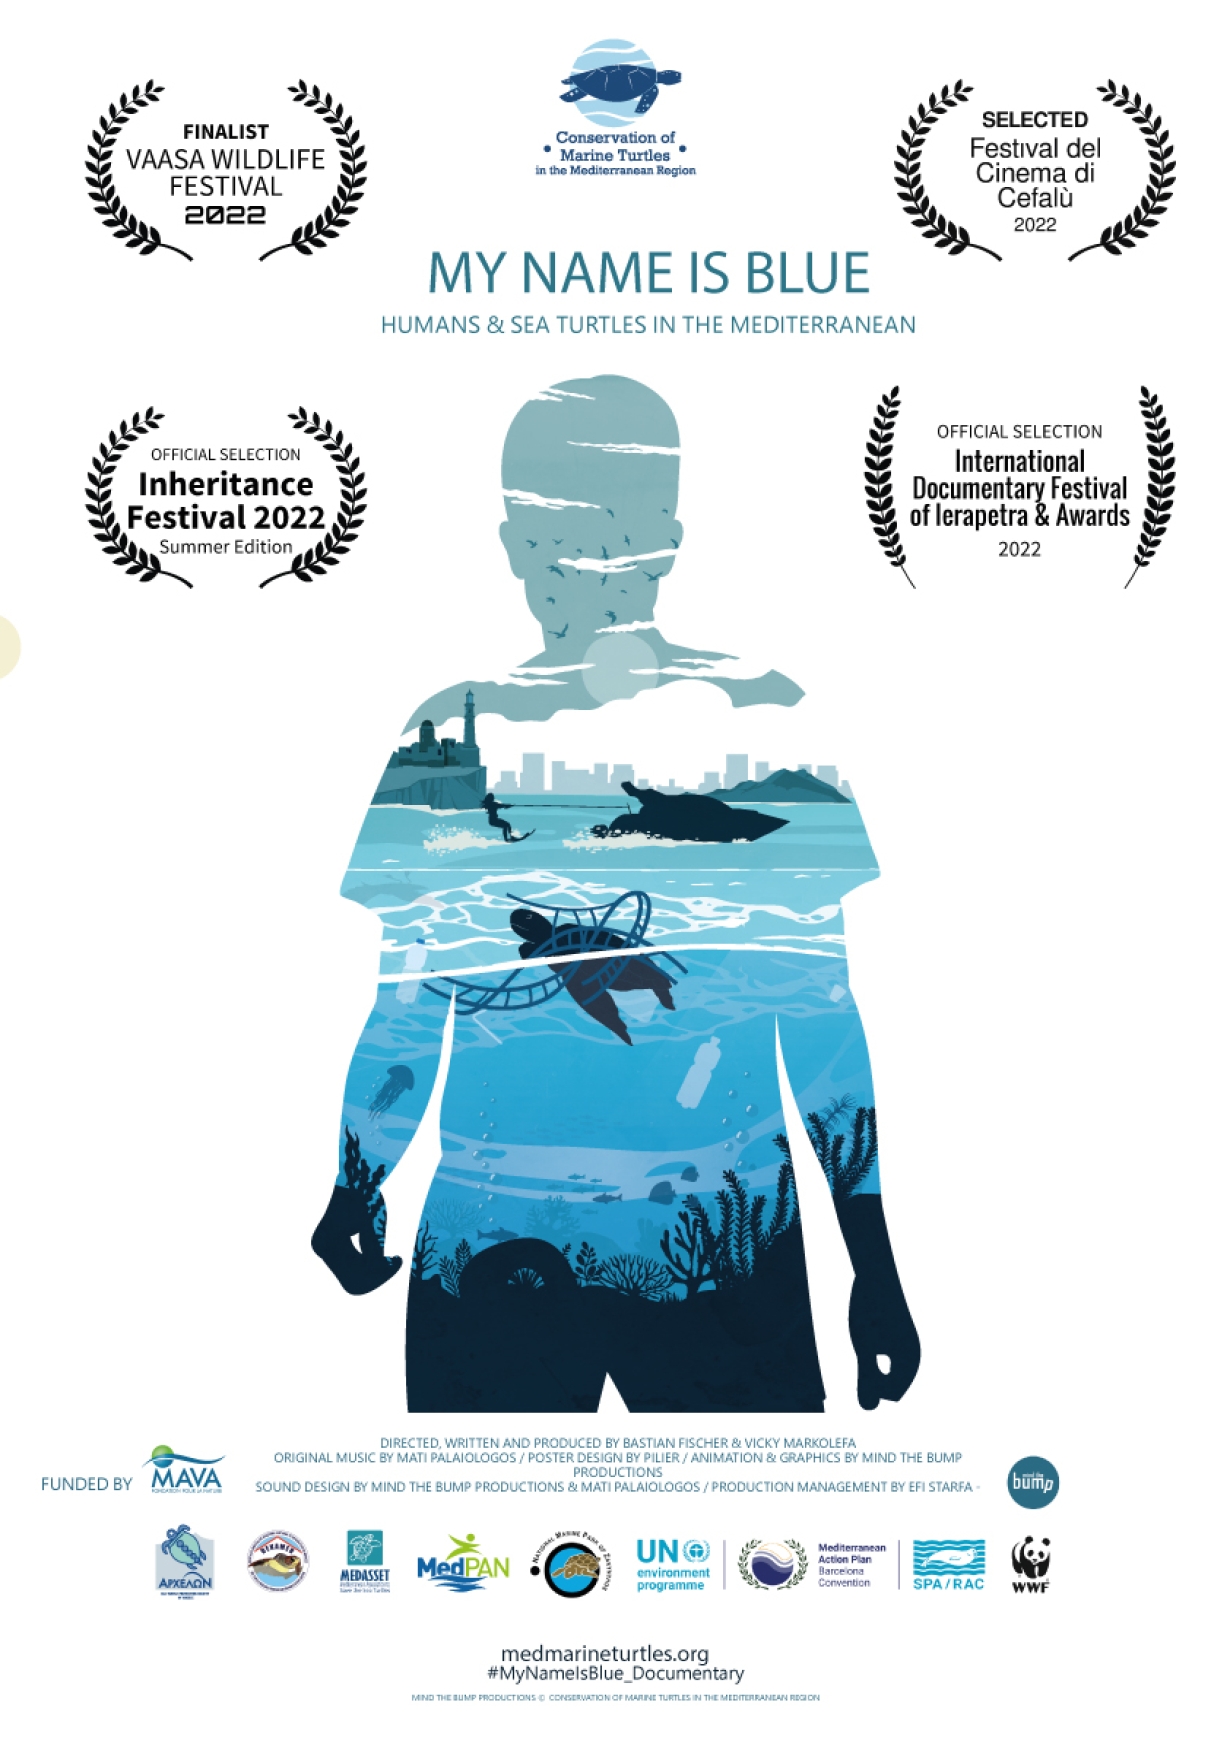 My Name is Blue Officially Selected by Renowned Festivals